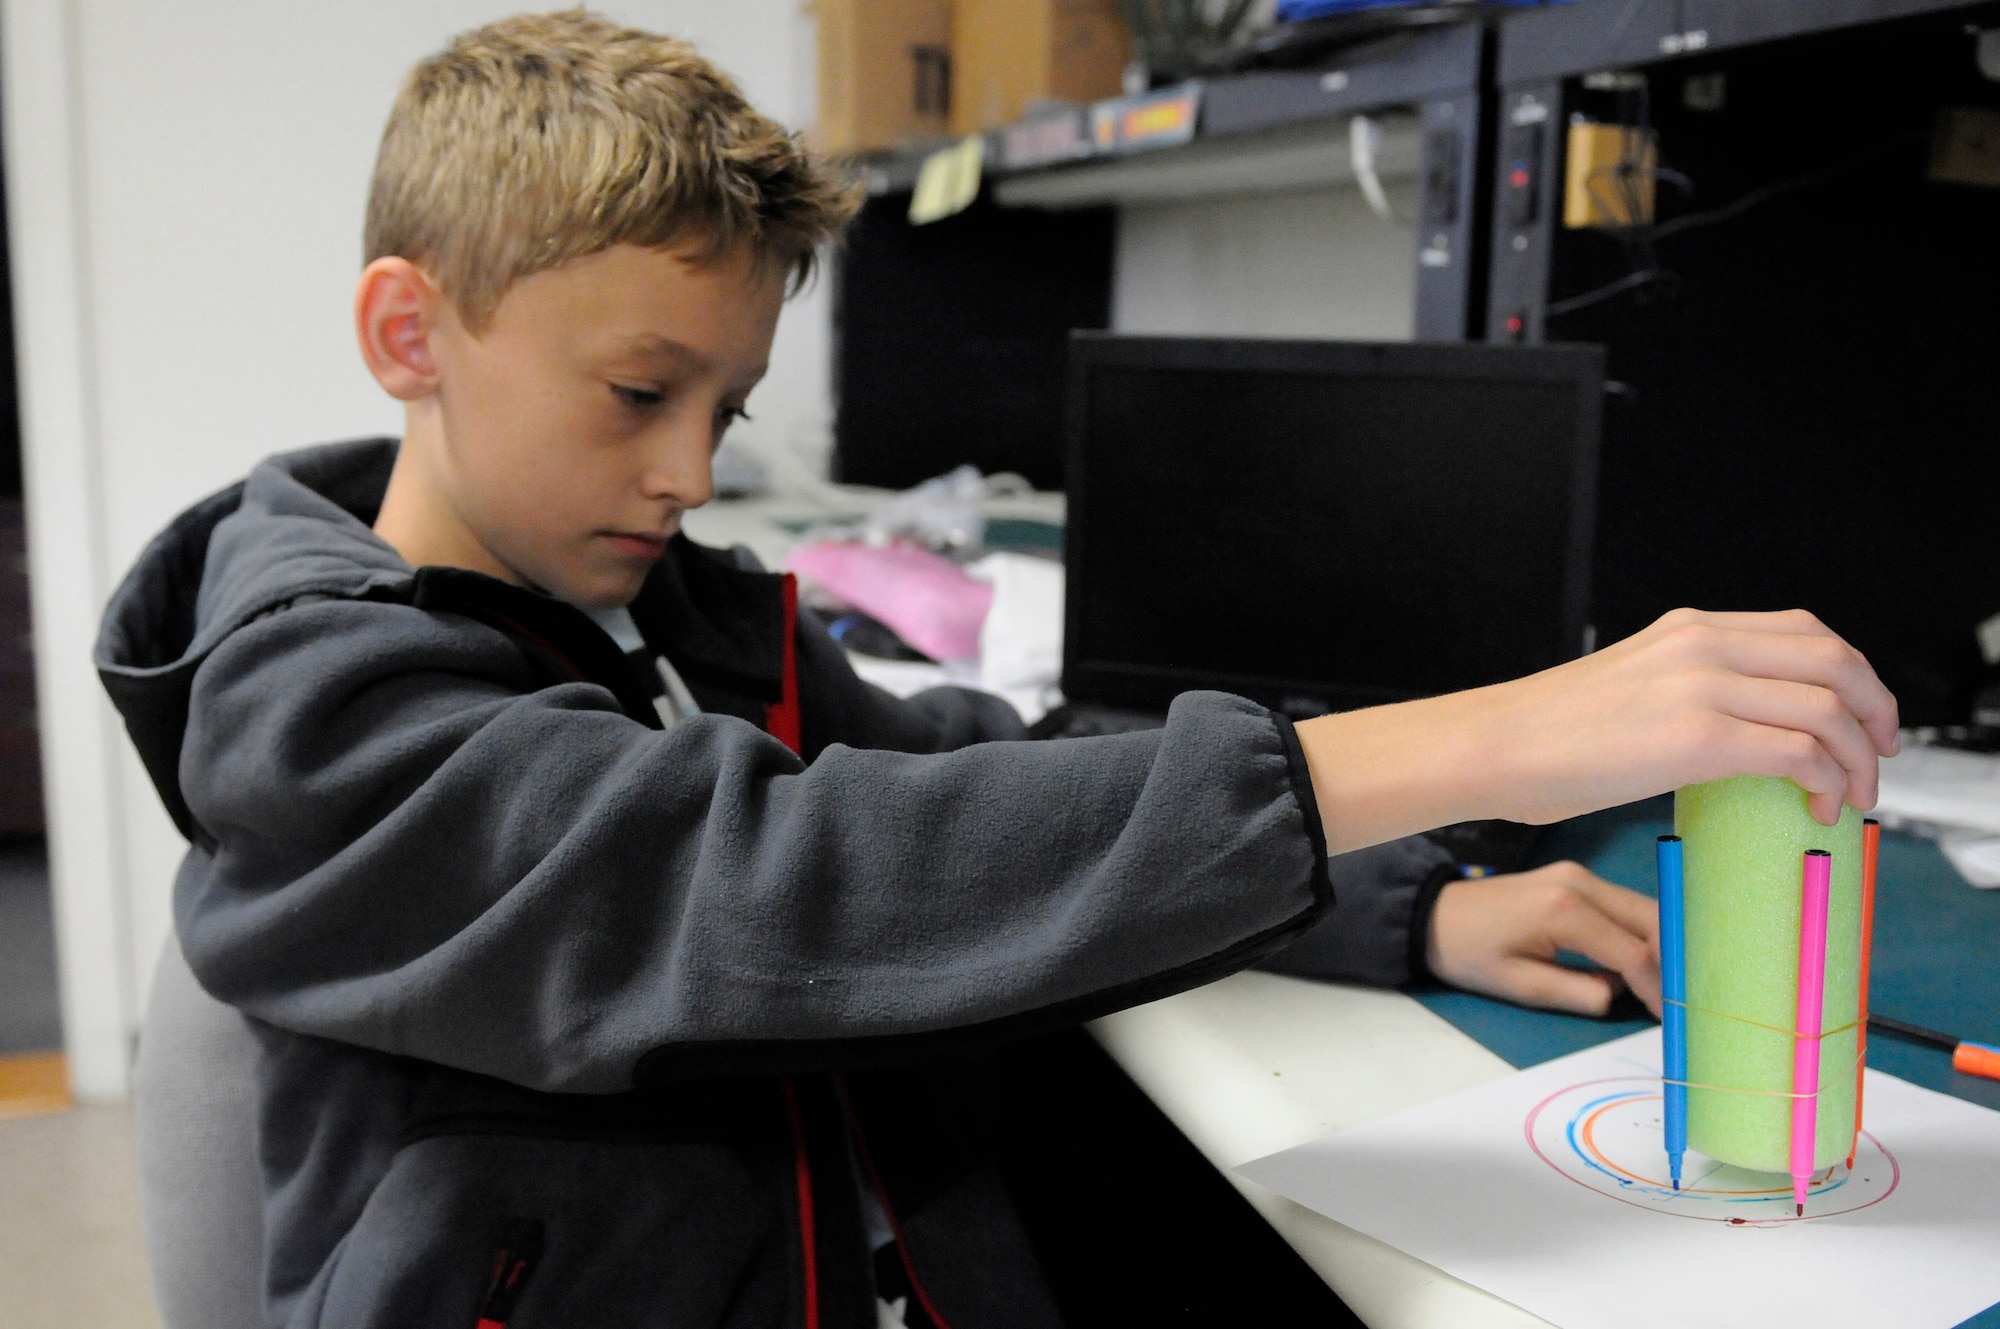 Landon Henry, son of Master Sgt. Brian Henry of the Kentucky Air National Guard’s 123rd Airlift Wing, assembles a doodle bot that he created at the Air Force Services Activity Technology Camp in San Antonio, Texas, in August 2015. Henry was selected from among dependent applicants across the Air Force to attend the camp, which focuses on building confidence with technology through problem solving and hands-on learning. (U.S. Air National Guard photo by Tech. Sgt. Vicky Spesard)